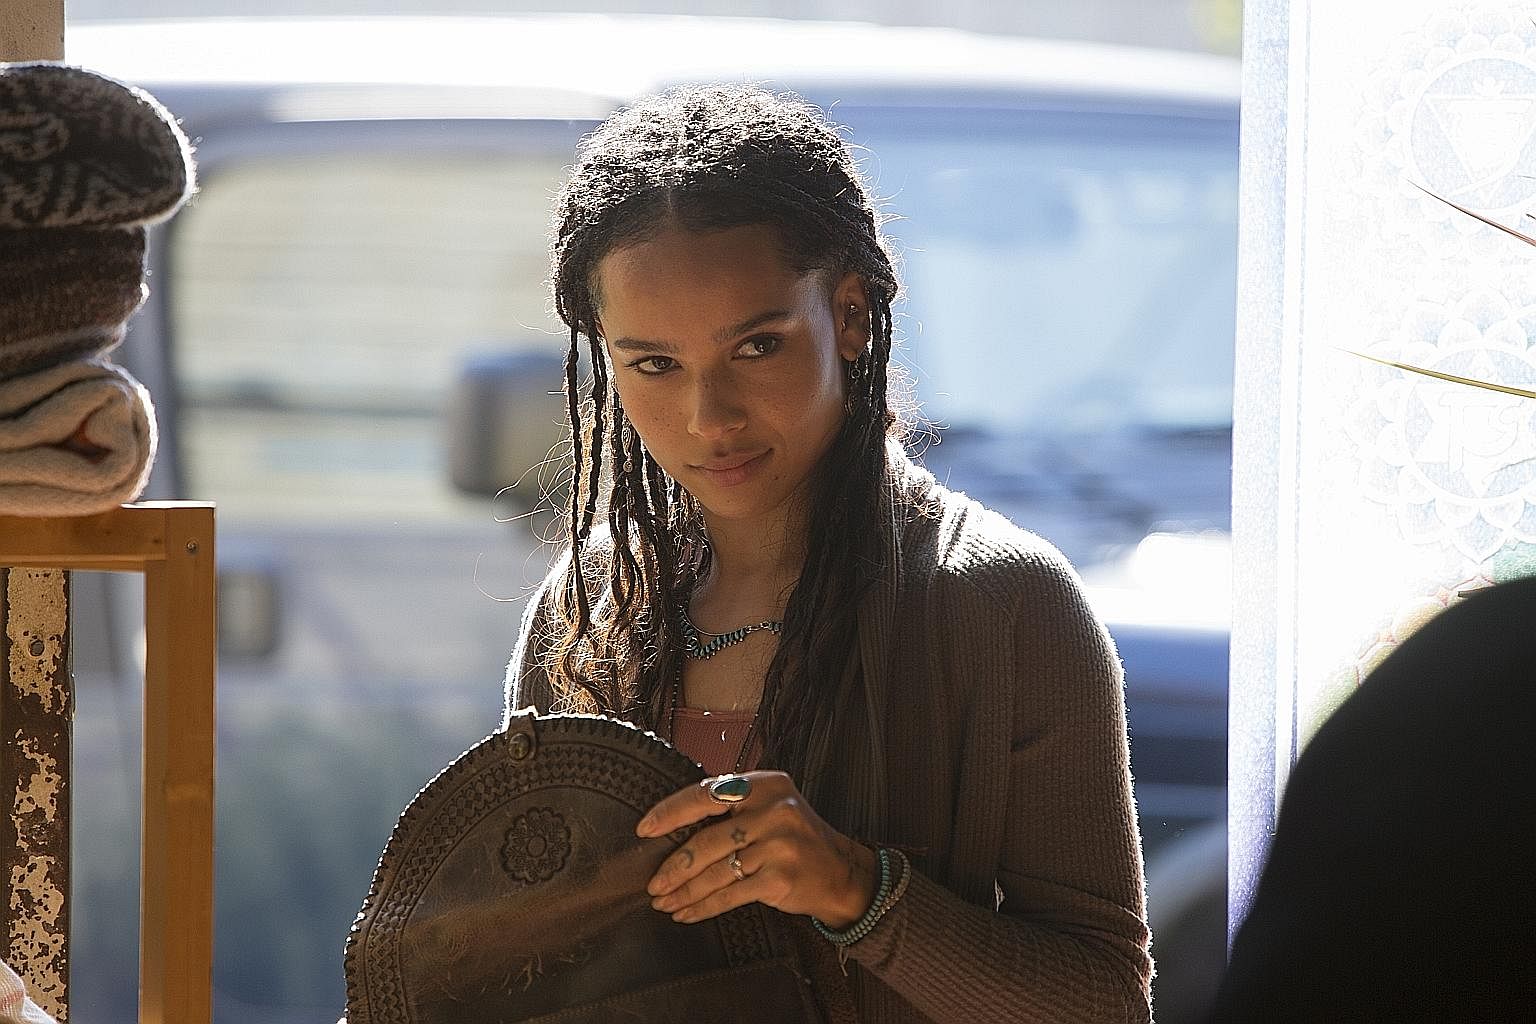 Zoe Kravitz (above) plays the young and hip Bonnie in Big Little Lies, while Timothy Olyphant is the husband of a flesh-eating woman (Drew Barrymore) in Santa Clarita Diet.